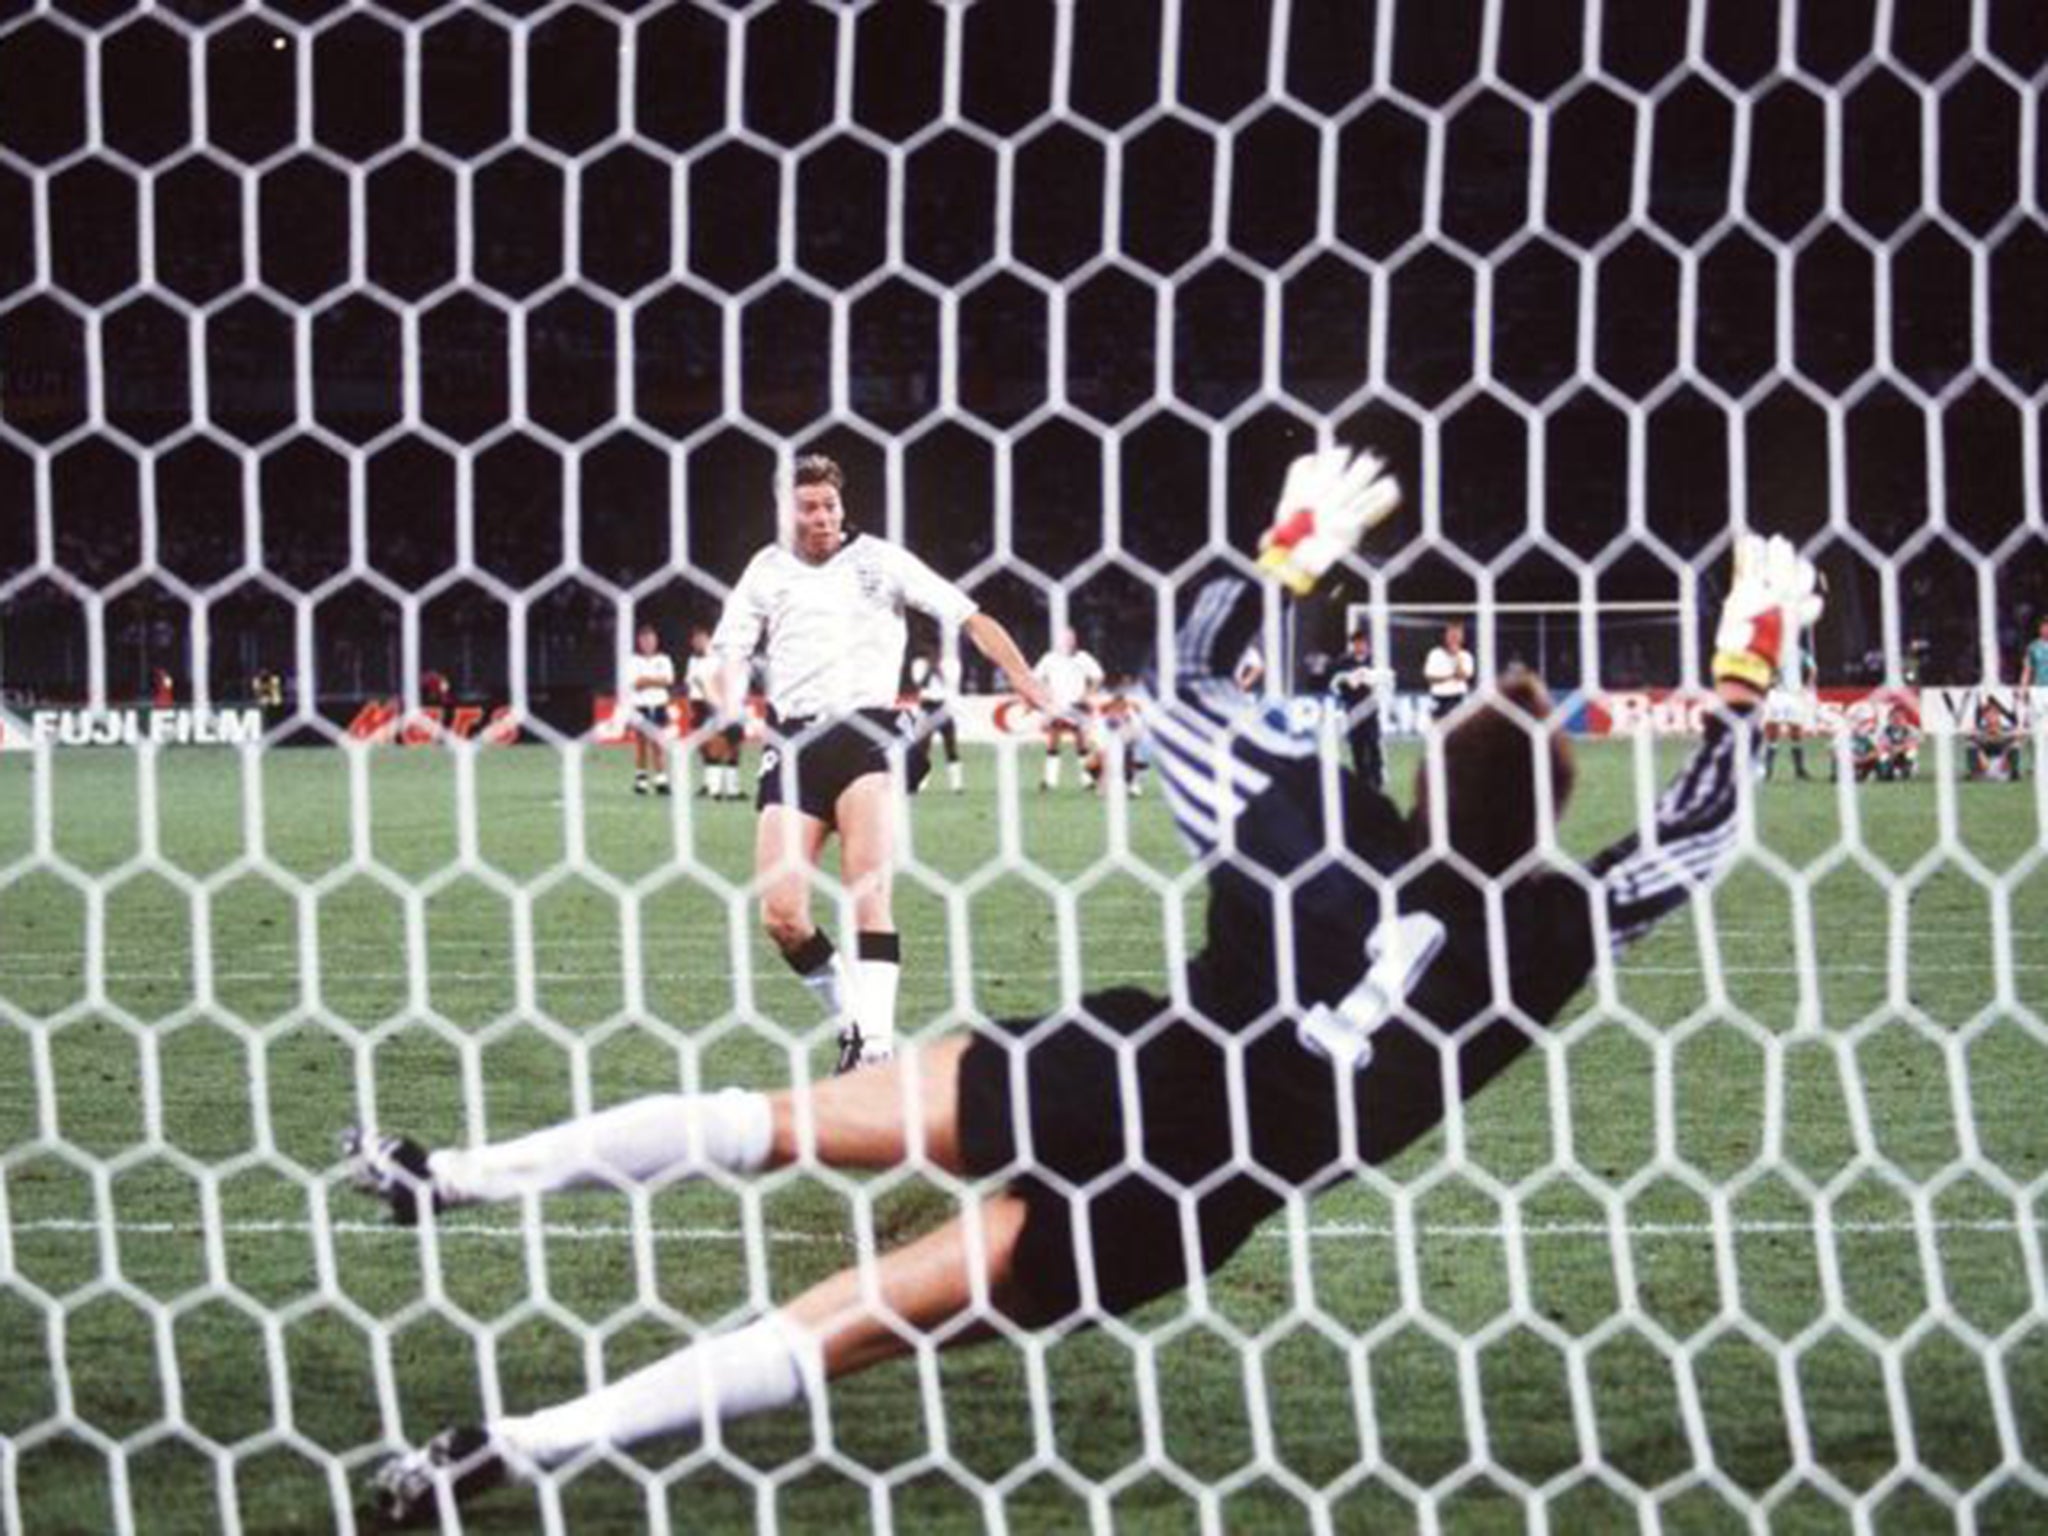 Chris Waddle sends his penalty over the bar in Turin